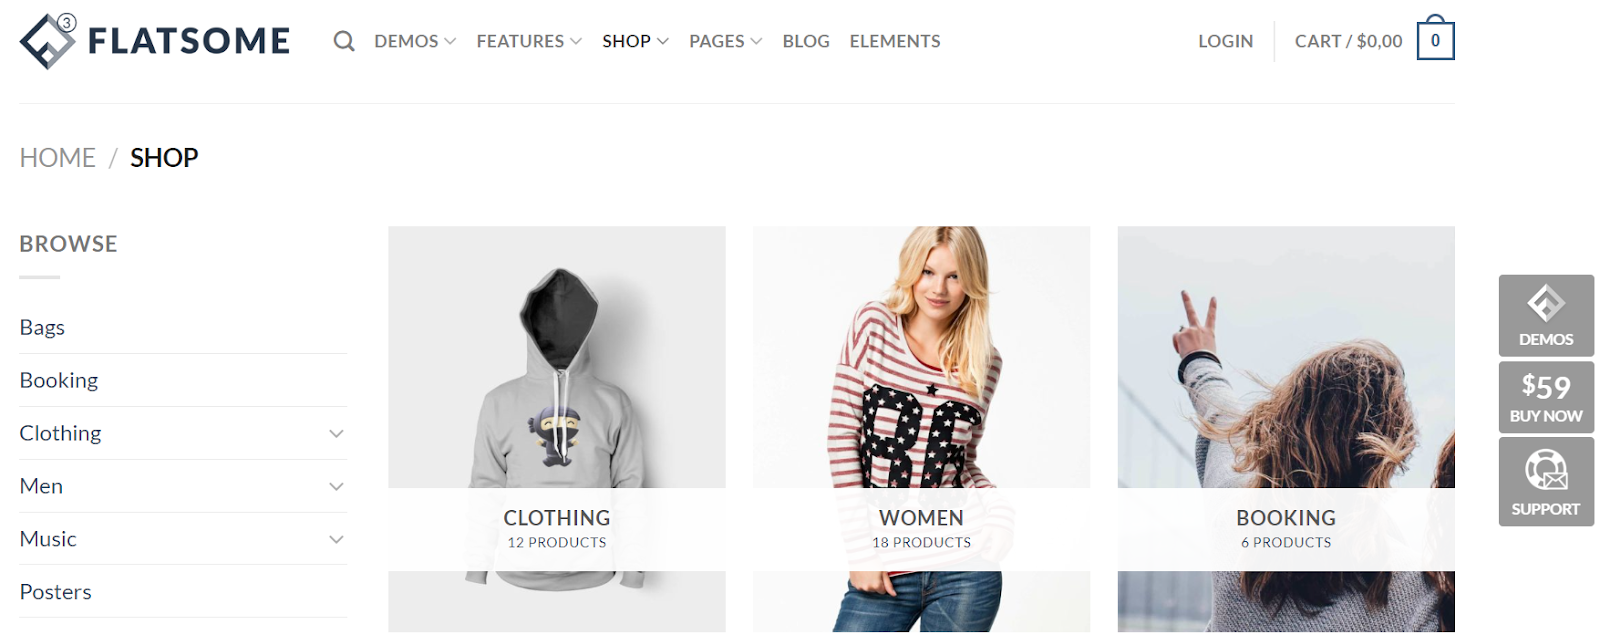 Flatsome is ThemeForest's best-selling WooCommerce themes.